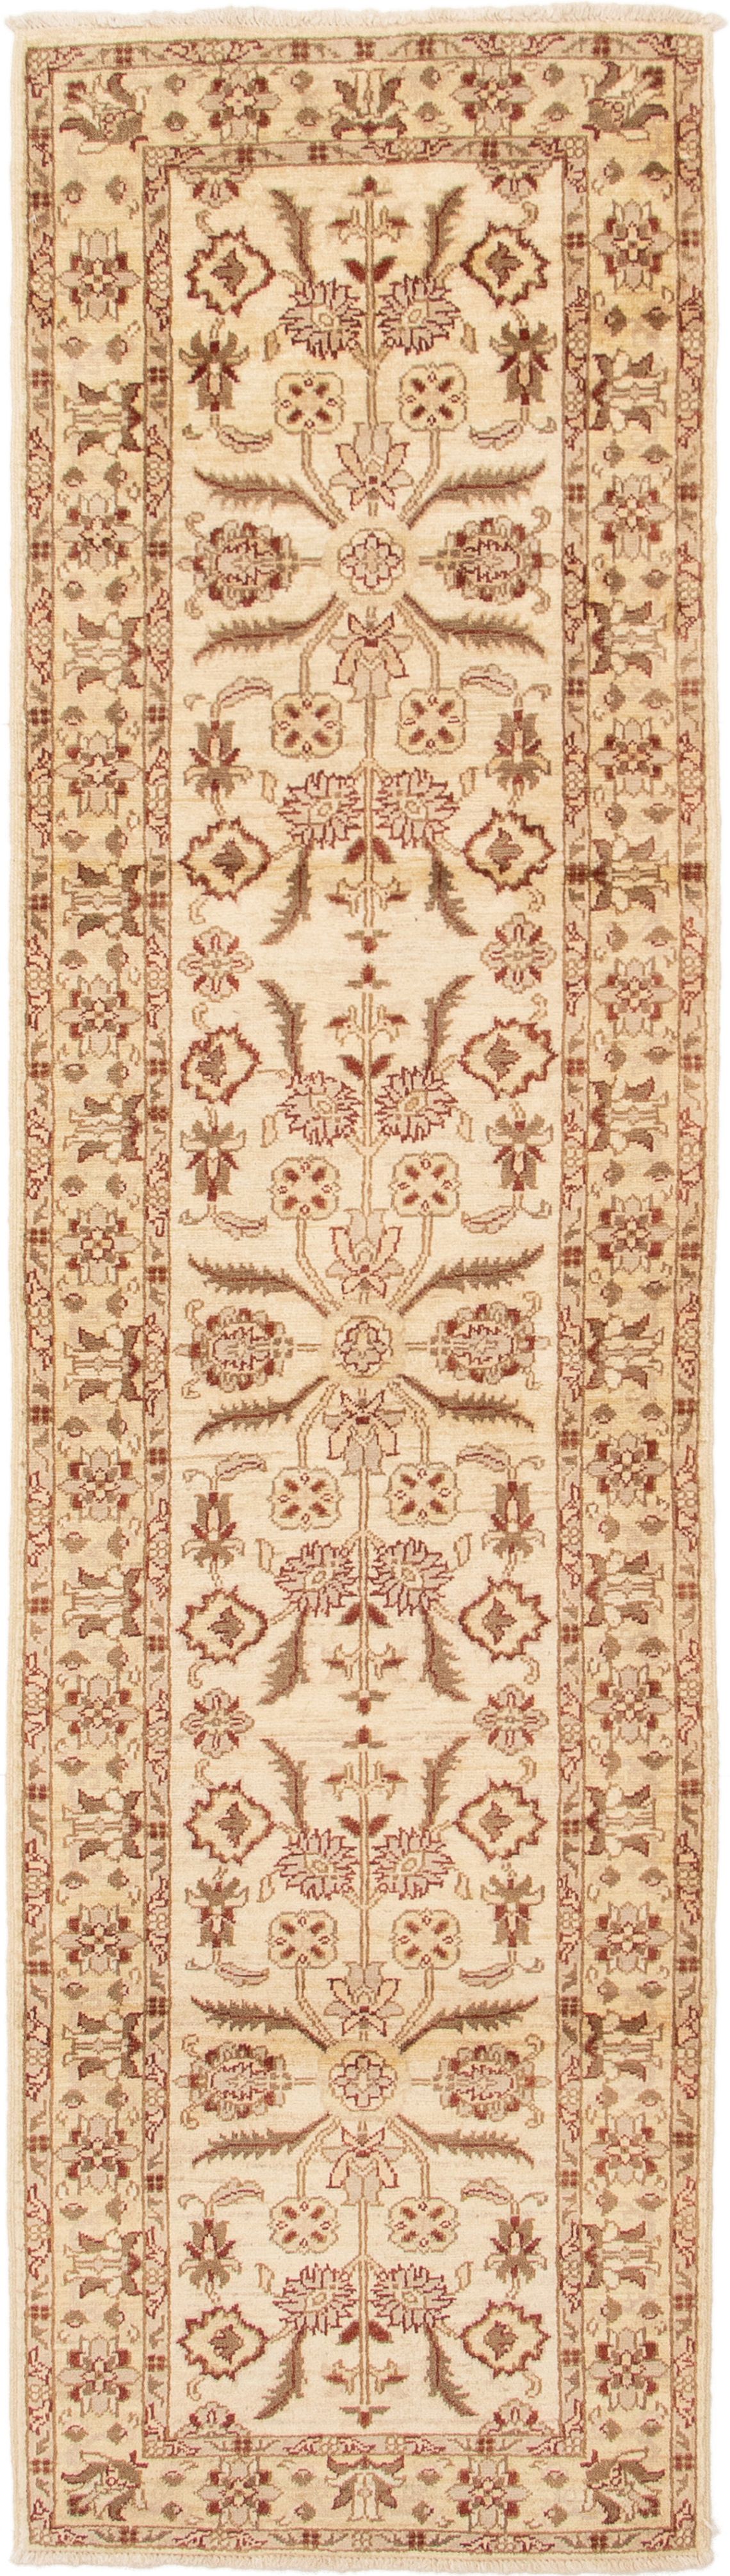 Hand-knotted Chobi Finest Cream Wool Rug 2'6" x 9'10" Size: 2'6" x 9'10"  